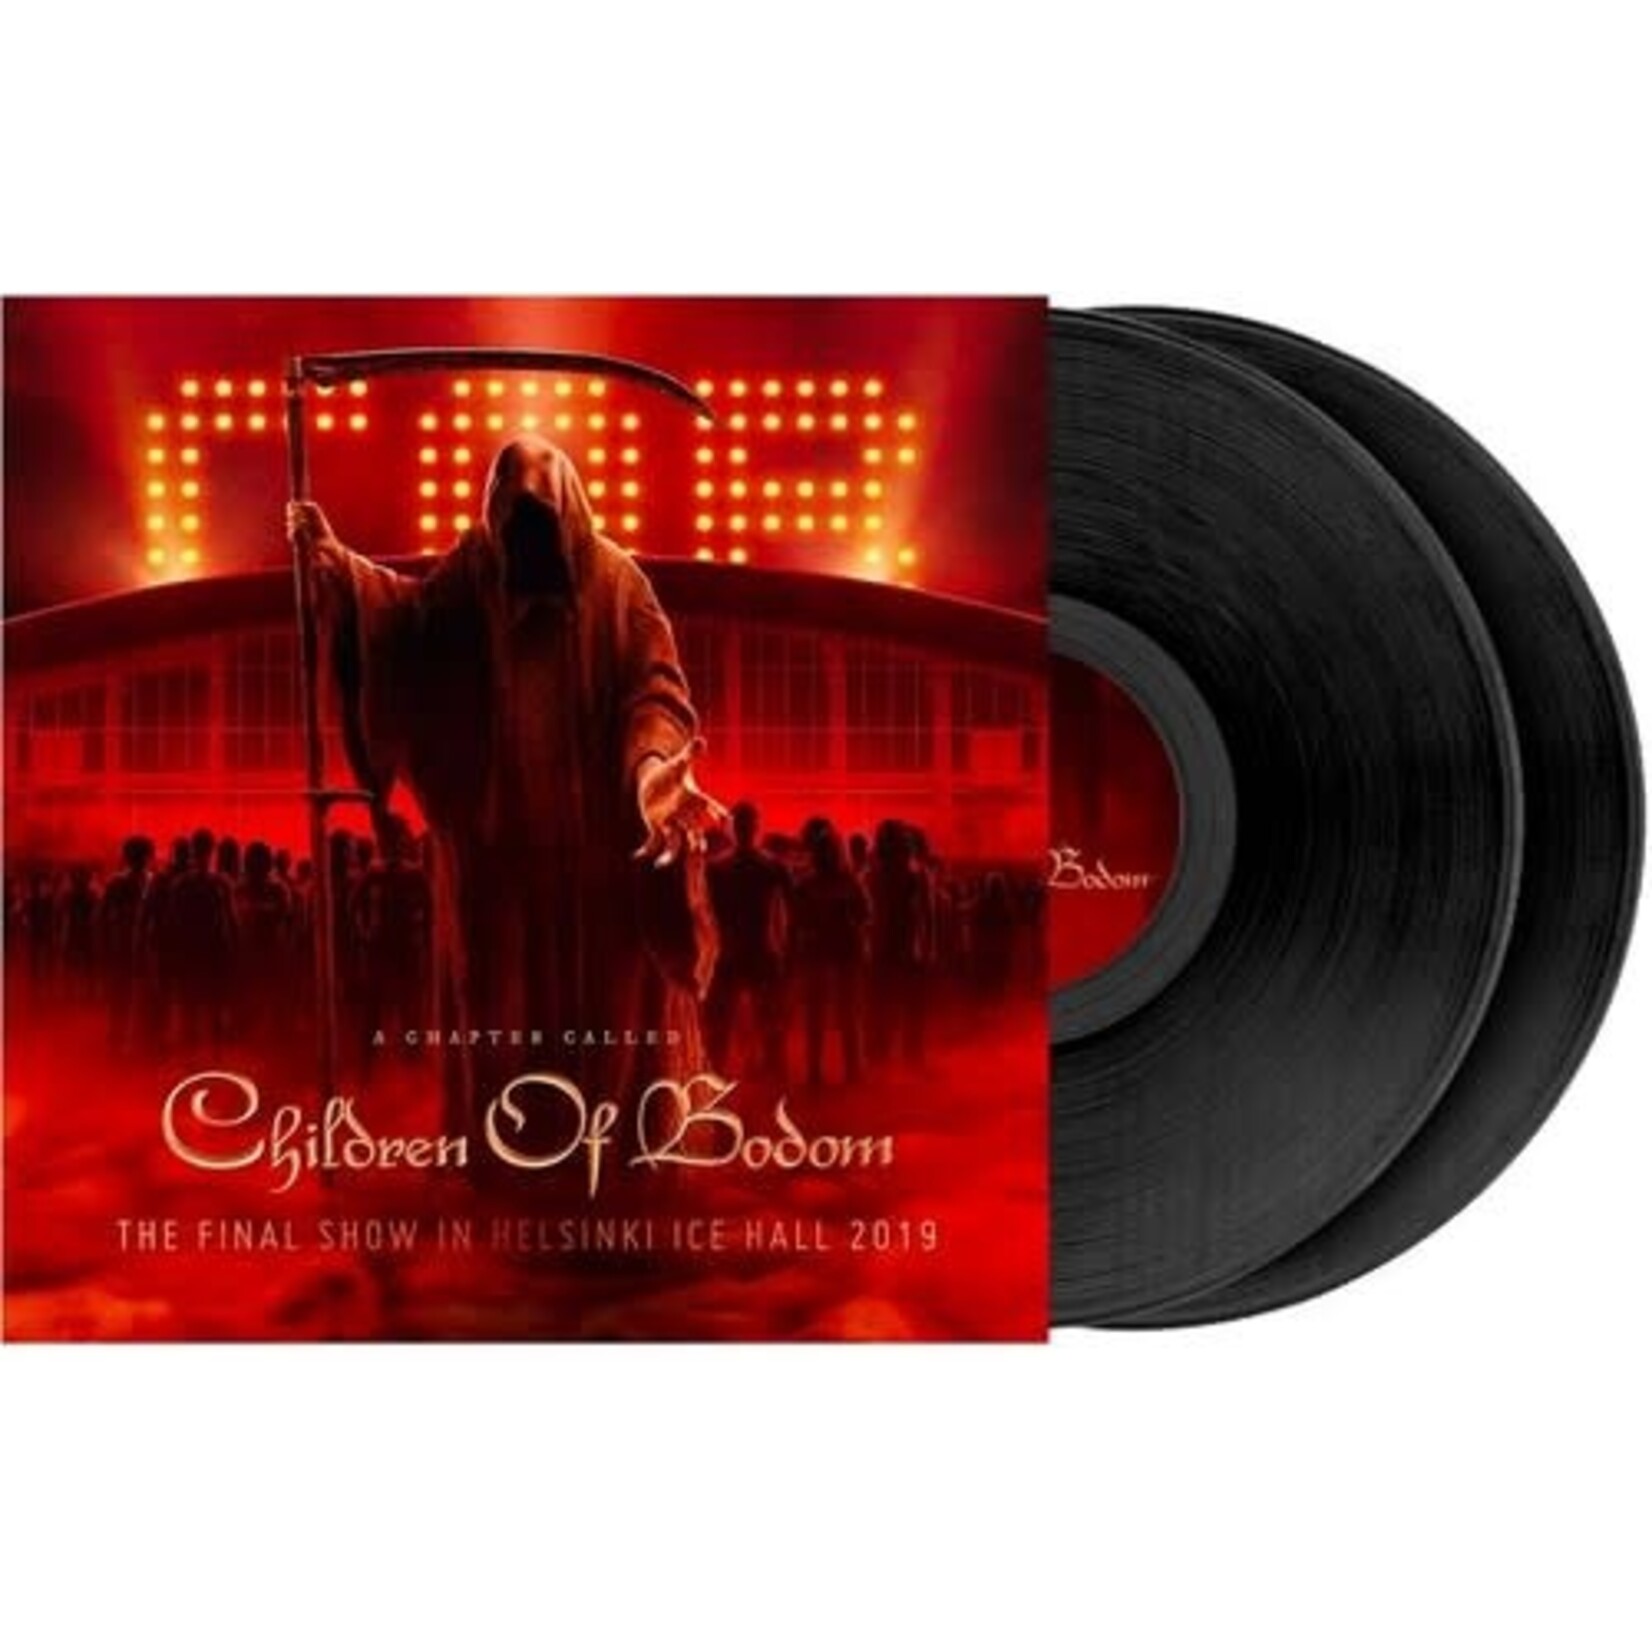 Children Of Bodom - A Chapter Called Children Of Bodom: The Final Show In Helsinki Ice Hall 2019 [2LP]